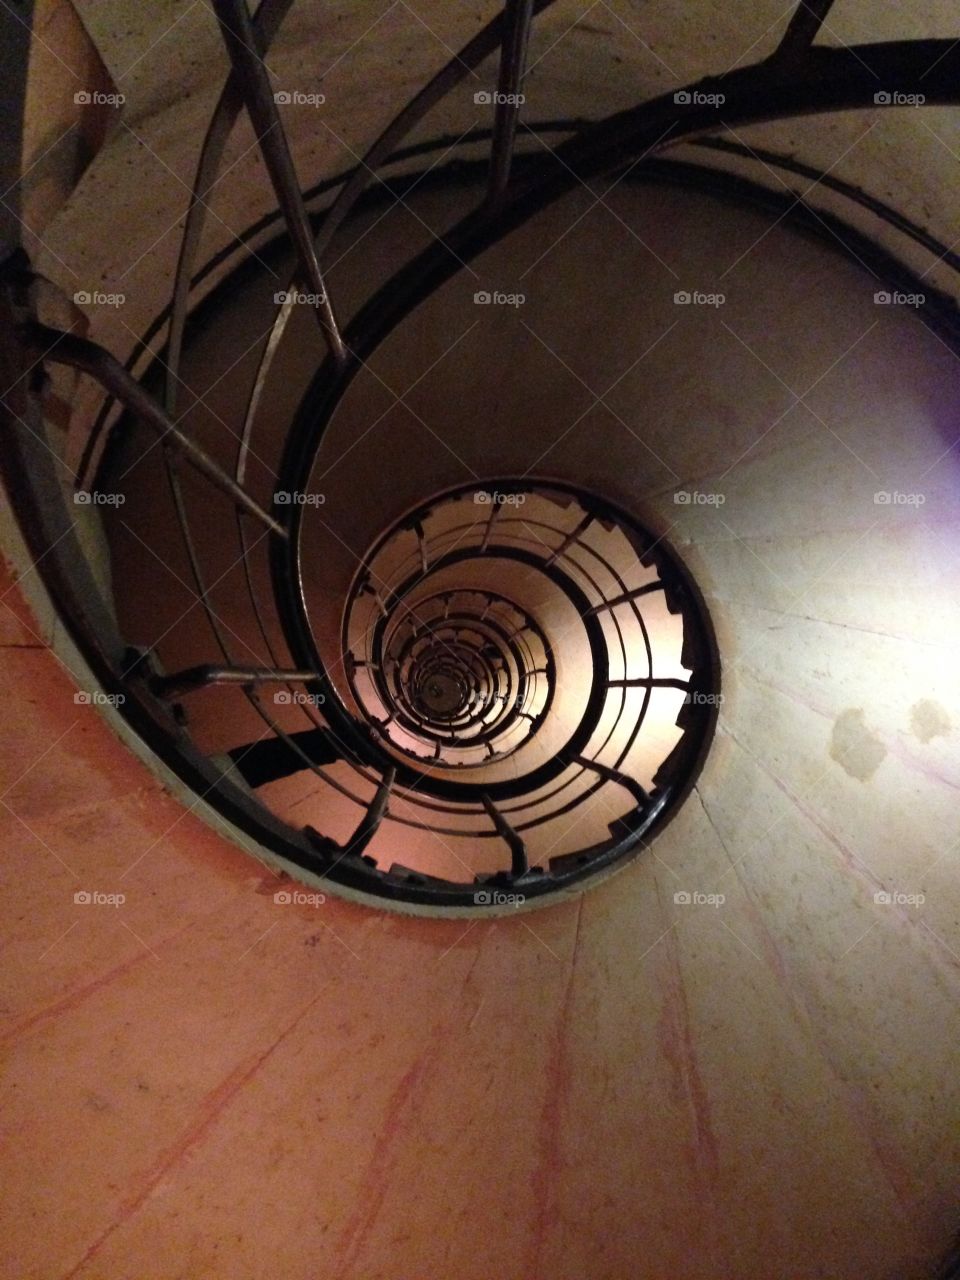 Spiral staircase . Underside of the staircase inside the Arc de Triomphe